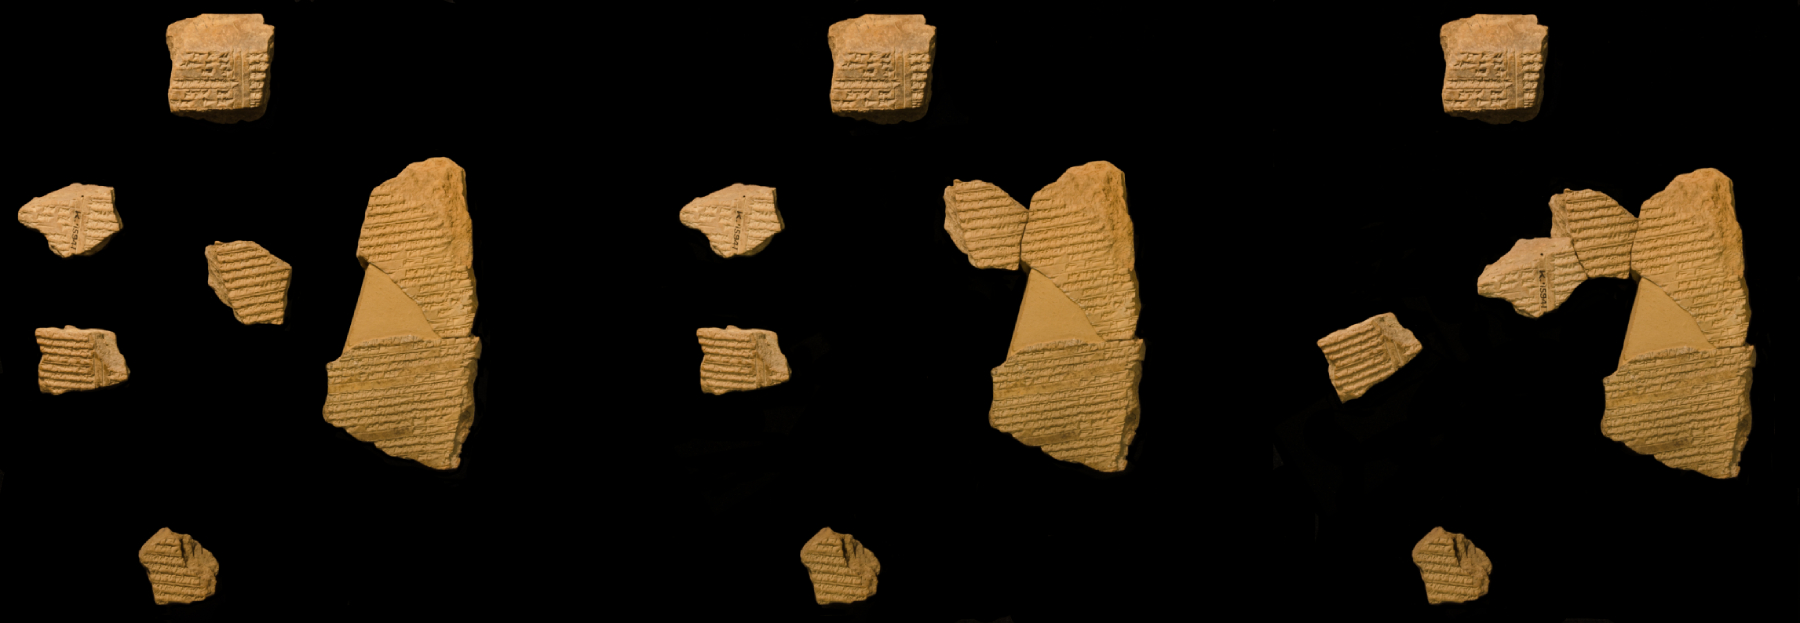 Fragments being joined back into their original tablet